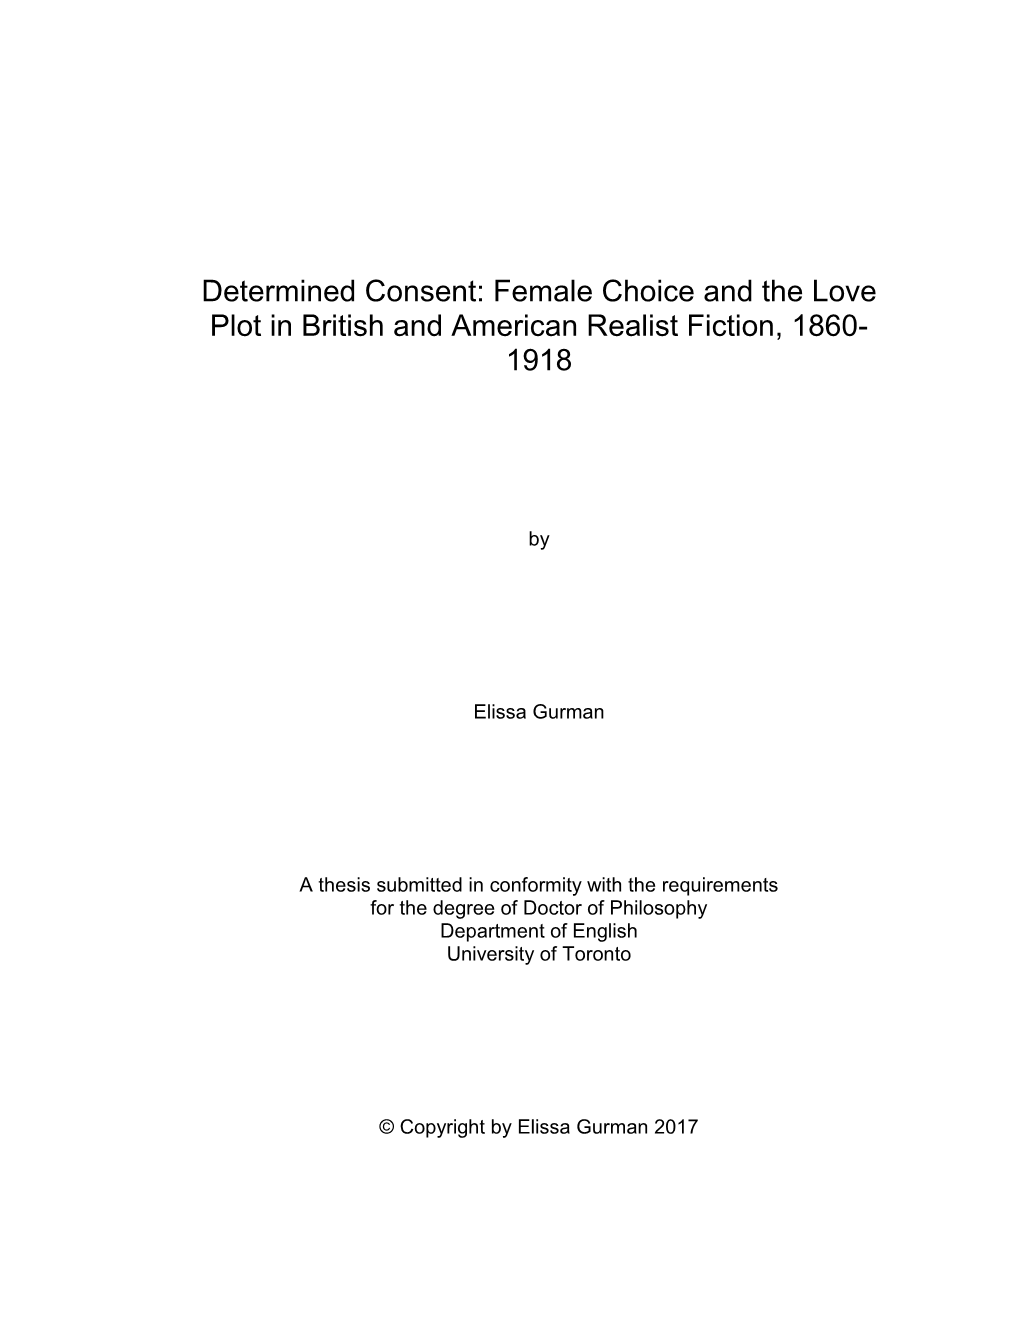 Female Choice and the Love Plot in British and American Realist Fiction, 1860- 1918